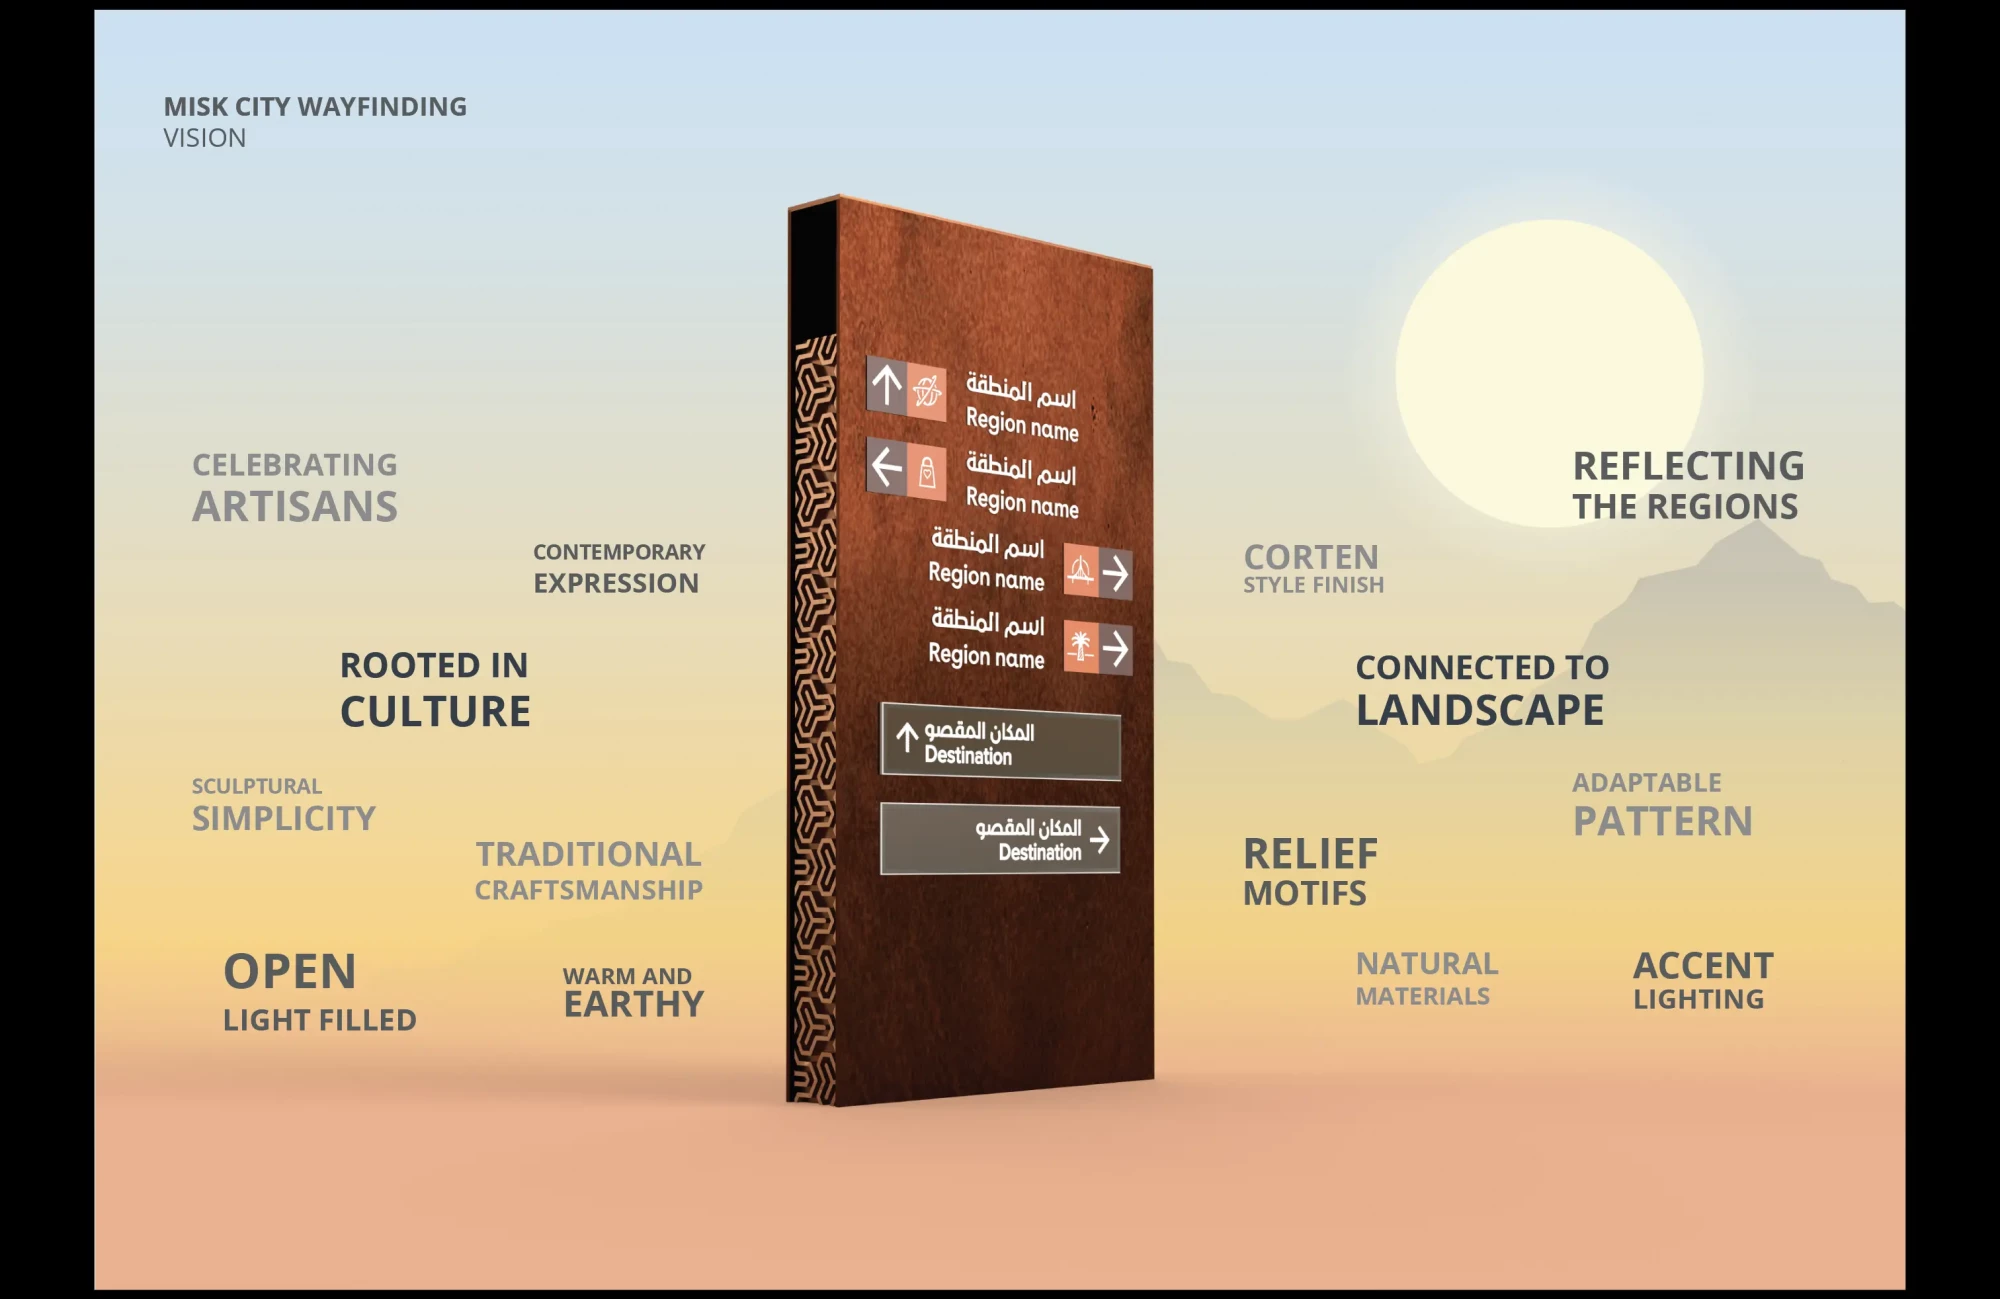 Wayfinding concept for Misk totems